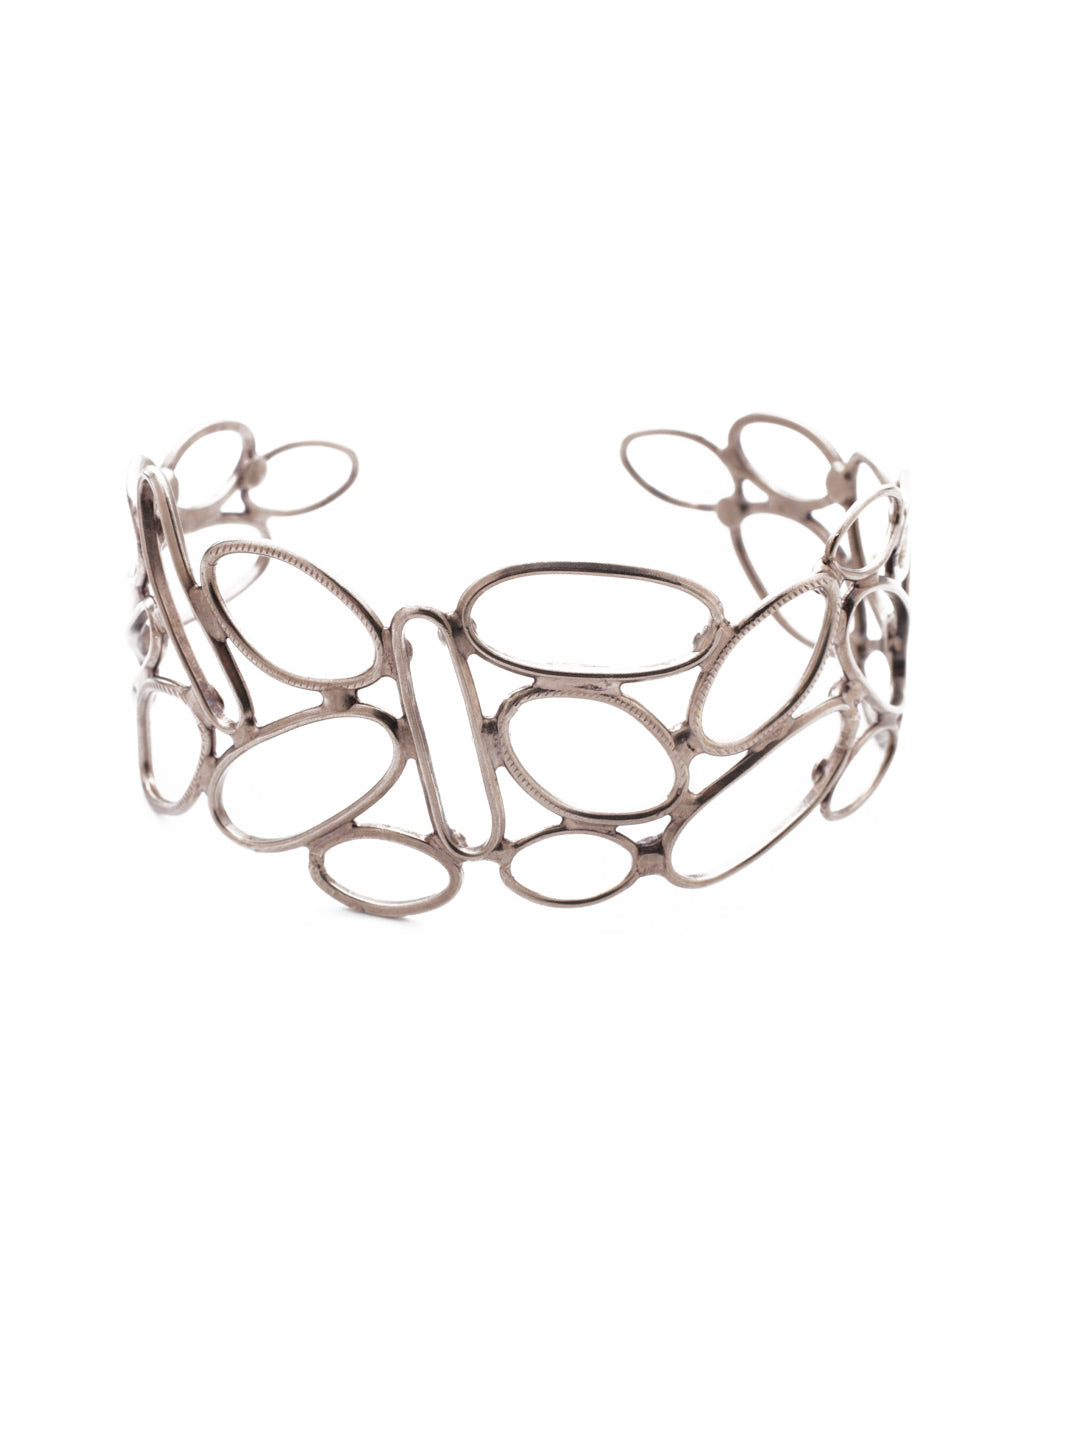 Salem Cuff Bracelet - 4BEU2ASCRY - <p>Show off your love of links with our Salem Cuff Bracelet. Its open, airy feel is fun and fits with any outfit choice. From Sorrelli's Crystal collection in our Antique Silver-tone finish.</p>